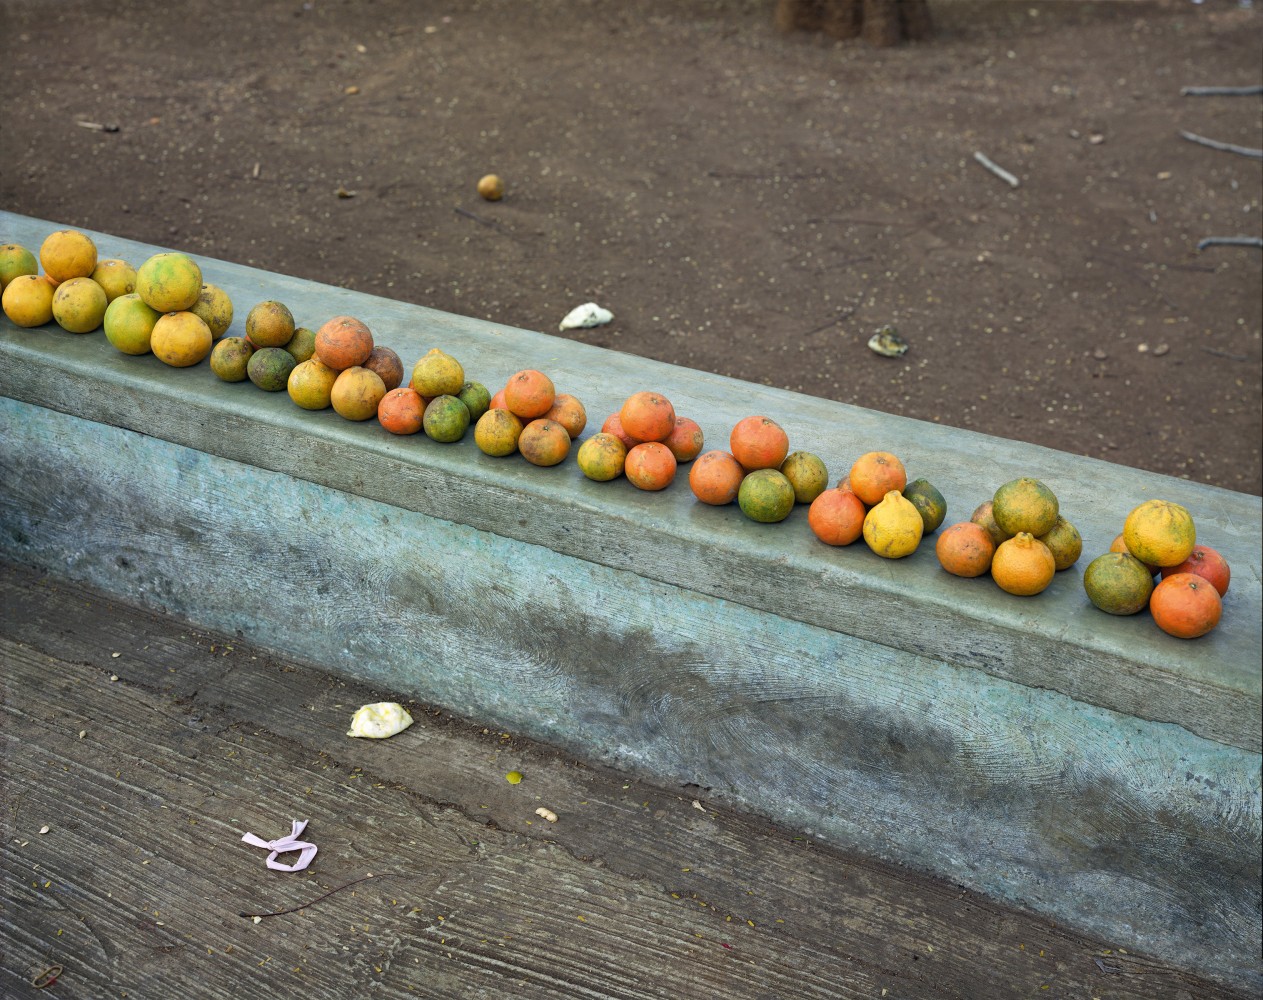 Stephen Shore

Yucat&amp;aacute;n, Mexico, 1990

1990

Chromogenic color print

24 x 30 inches (61 x 76.2 cm)

30 1/4 x 36 1/2 inches (76.8 x 92.7 cm) paper size

Edition of 8, with 2 AP

SS 2369